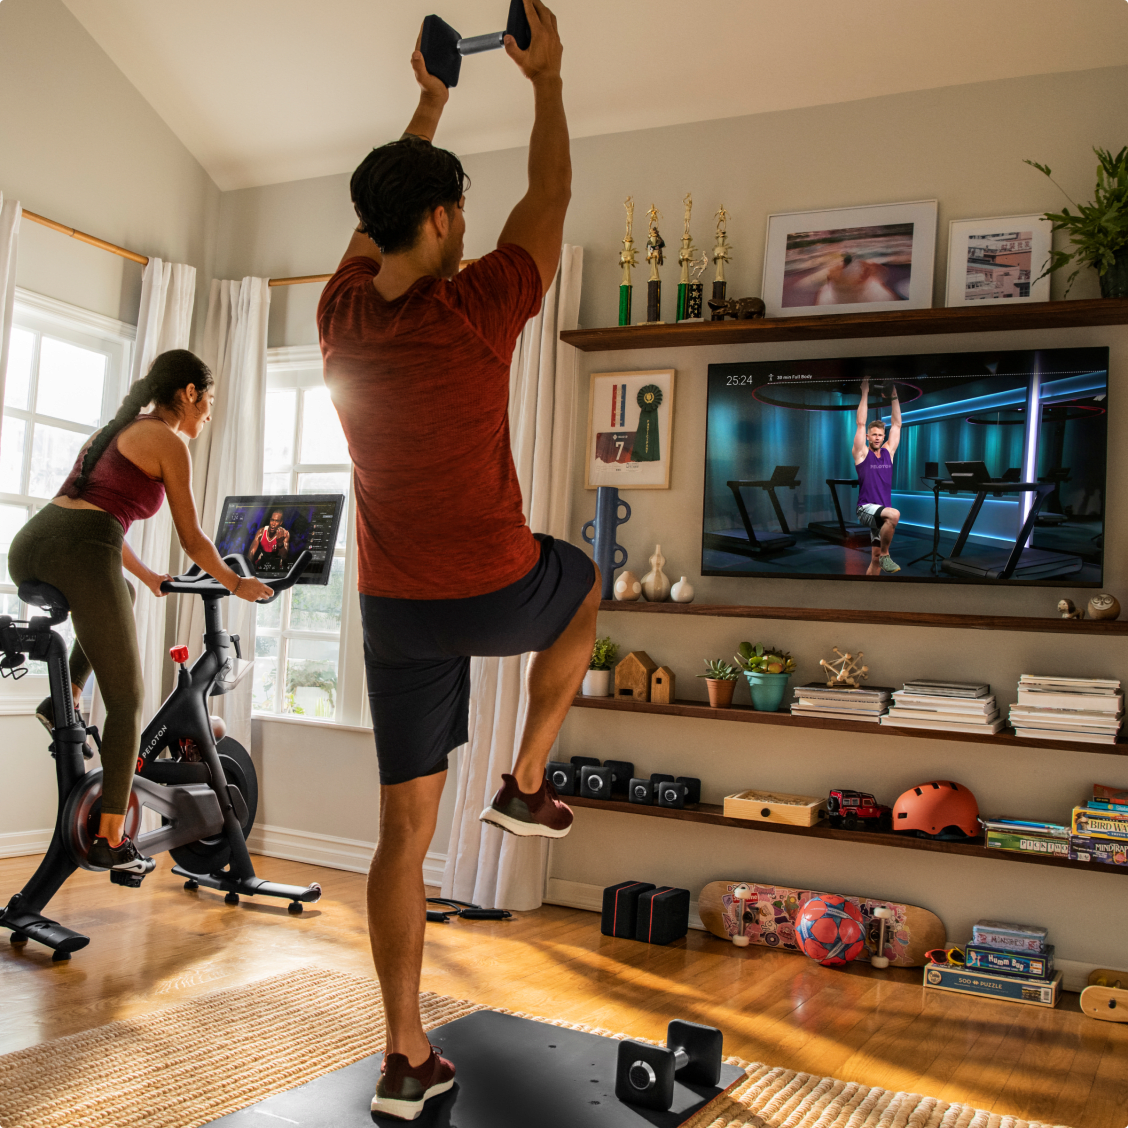 one person on a peloton bike and the other person doing floor exercises watching peloton workouts on the tv